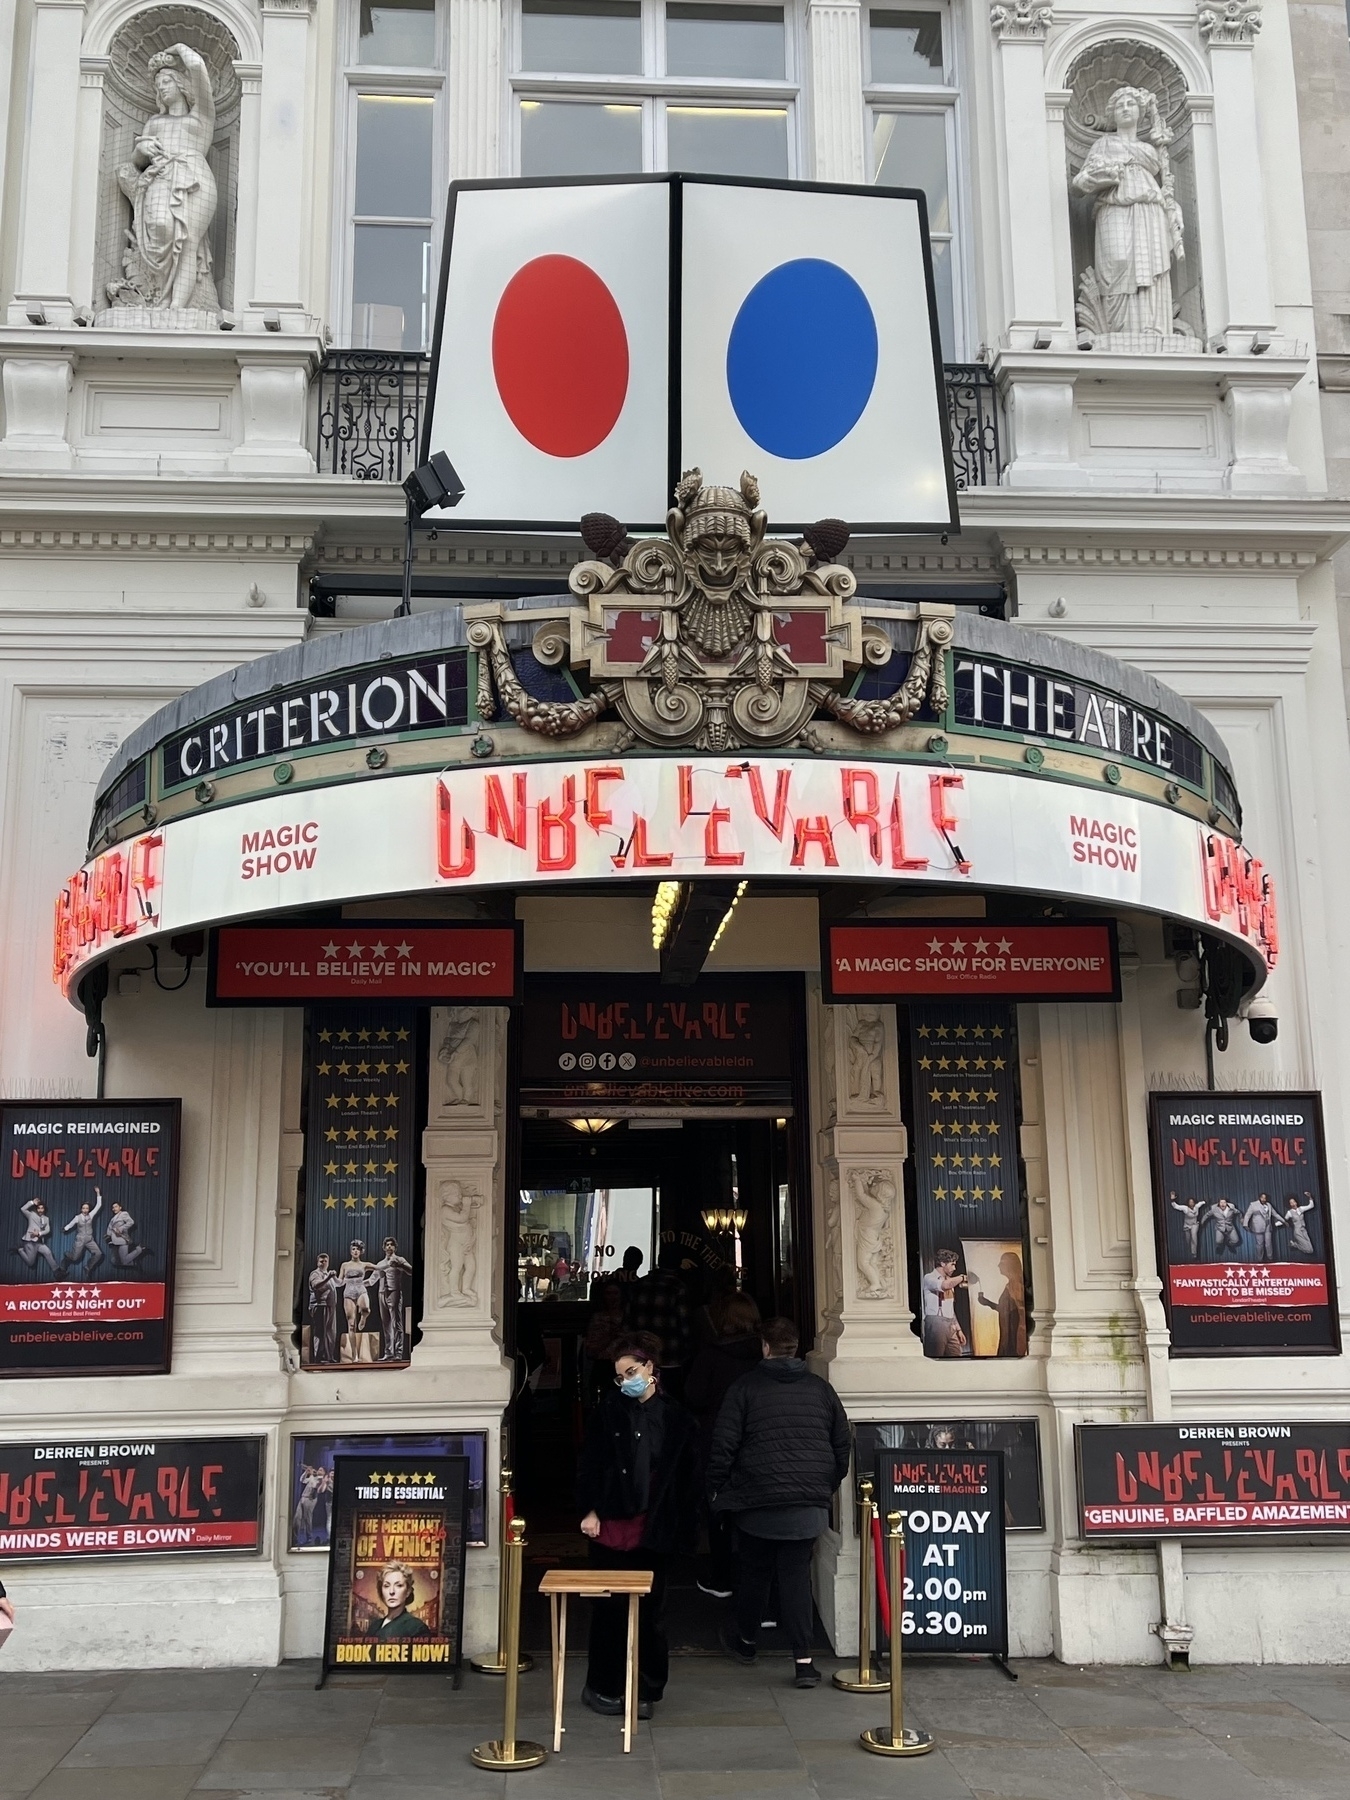 Photograph of the entrance to the Criterion Theatre